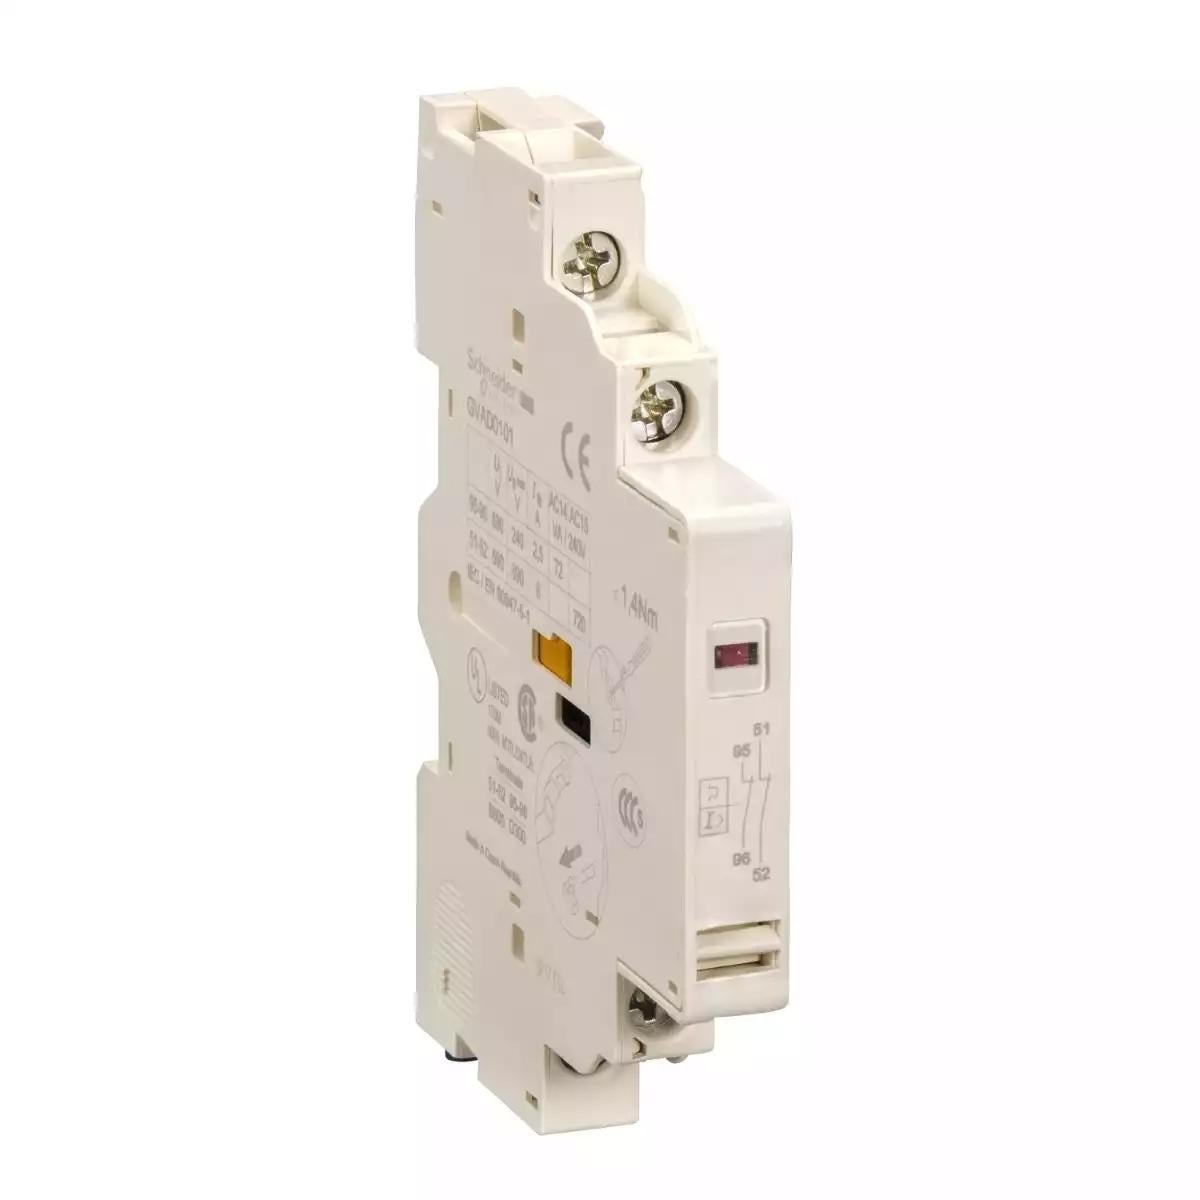 Schneider Electric TeSys GV3 - auxiliary contact - 1 NO + 1 NC (fault)